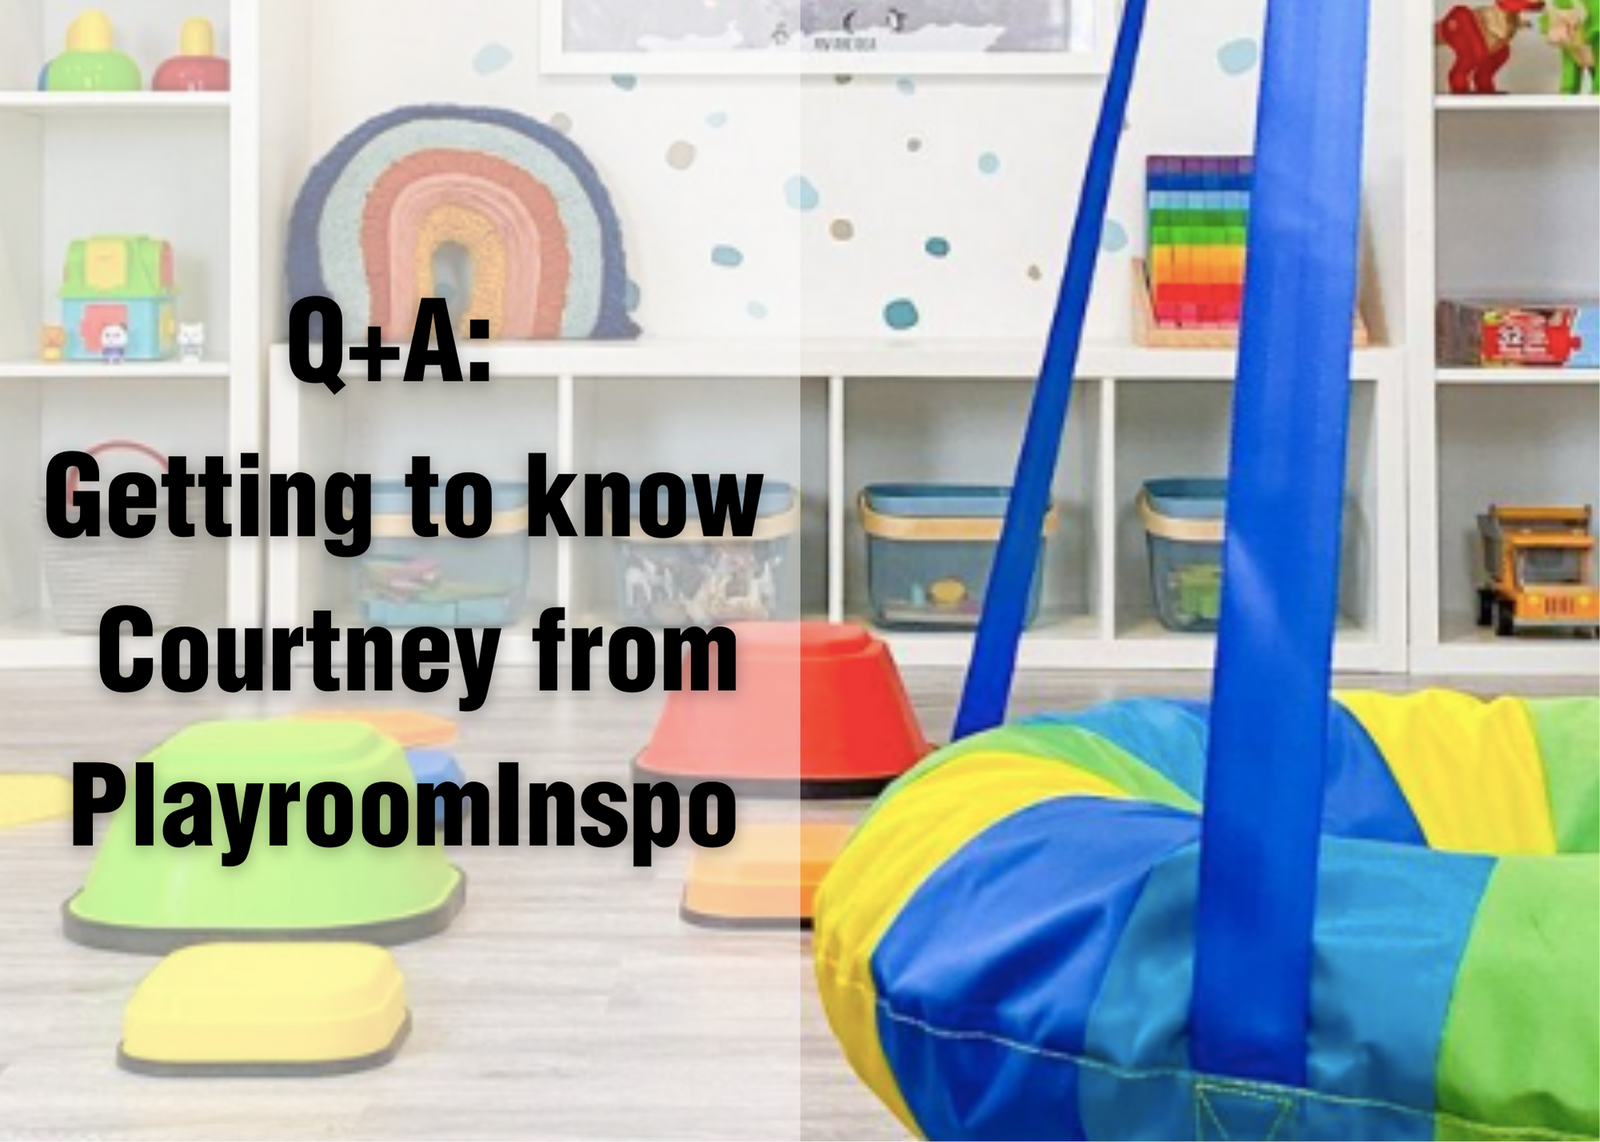 Q+A: Getting to know Courtney from Playroom Inspo